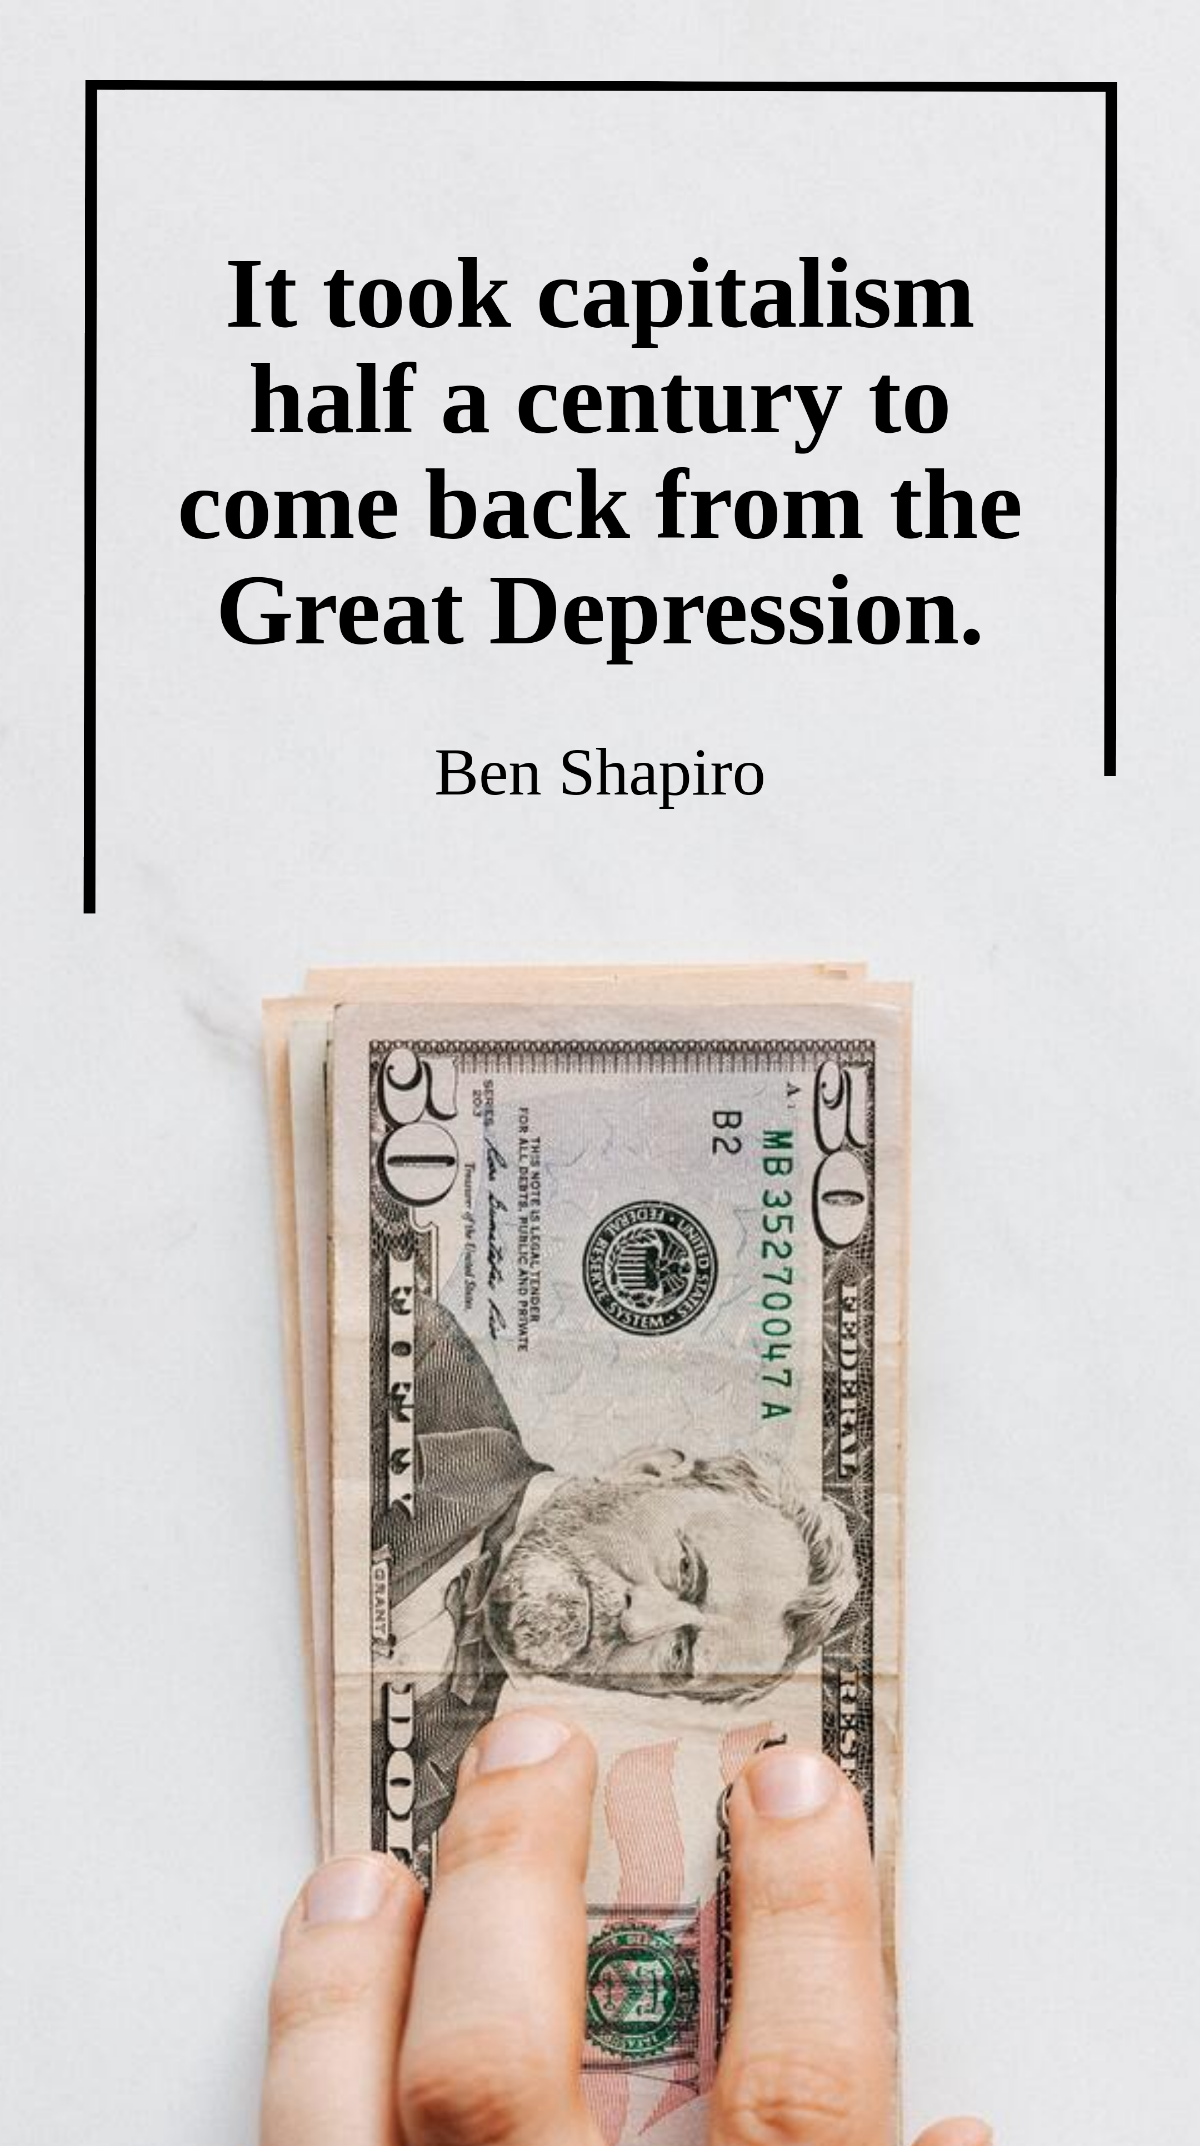 Ben Shapiro - It took capitalism half a century to come back from the Great Depression. Template